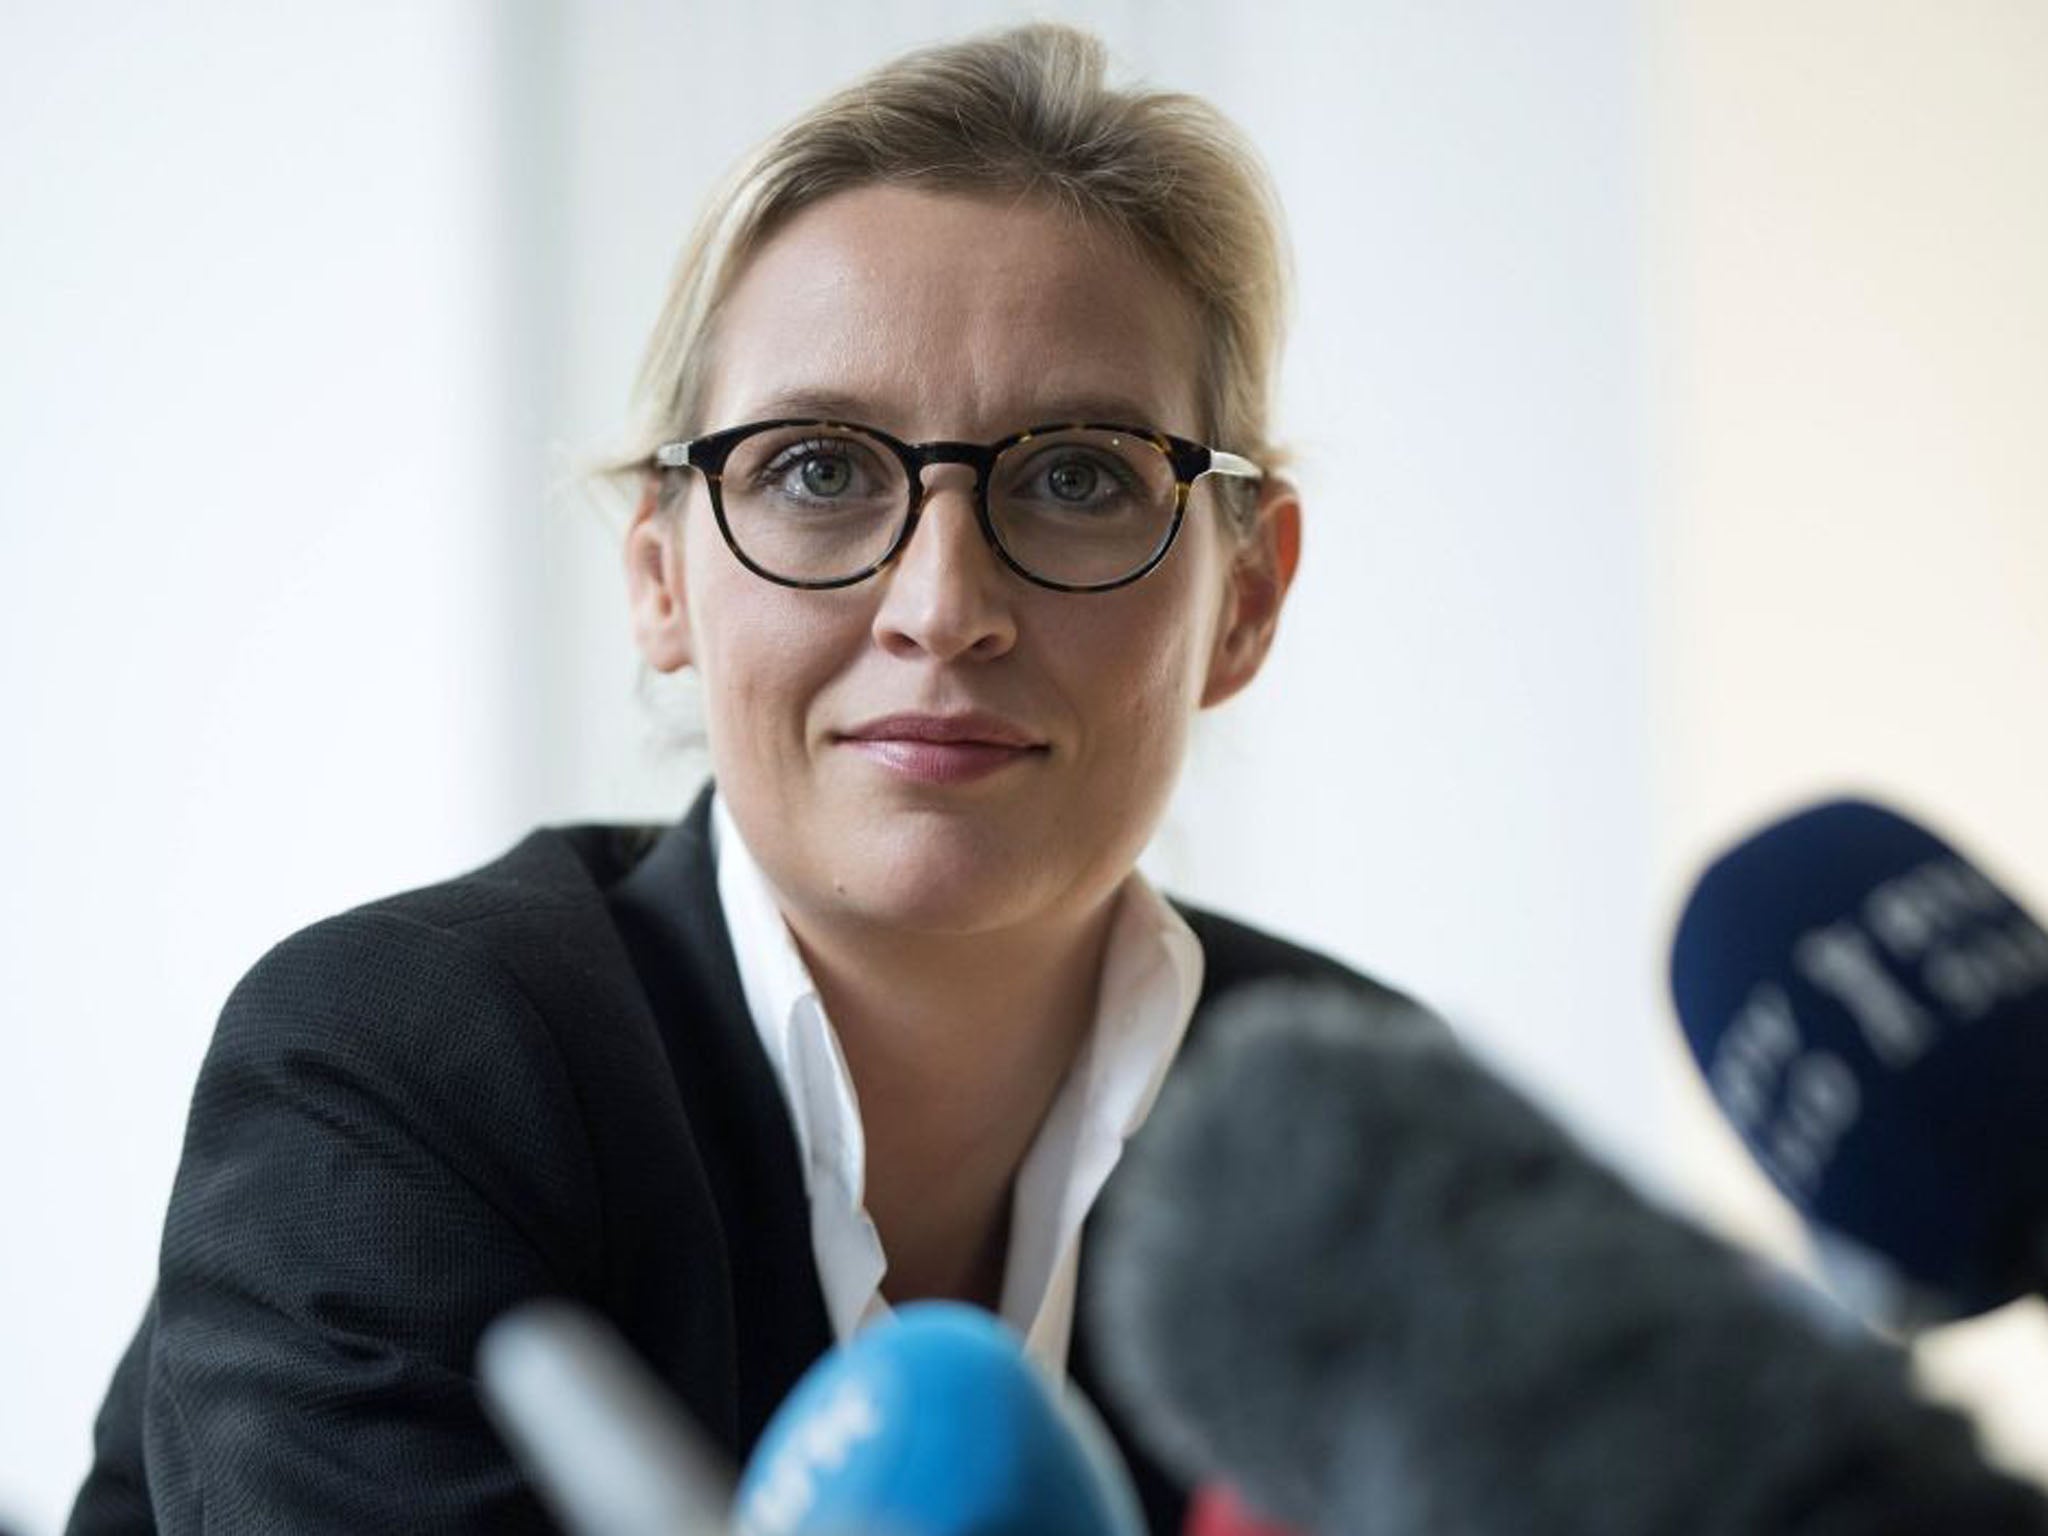 Alice Weidel reportedly employed the asylum seeker on a 'cash in hand' basis at her Swiss home